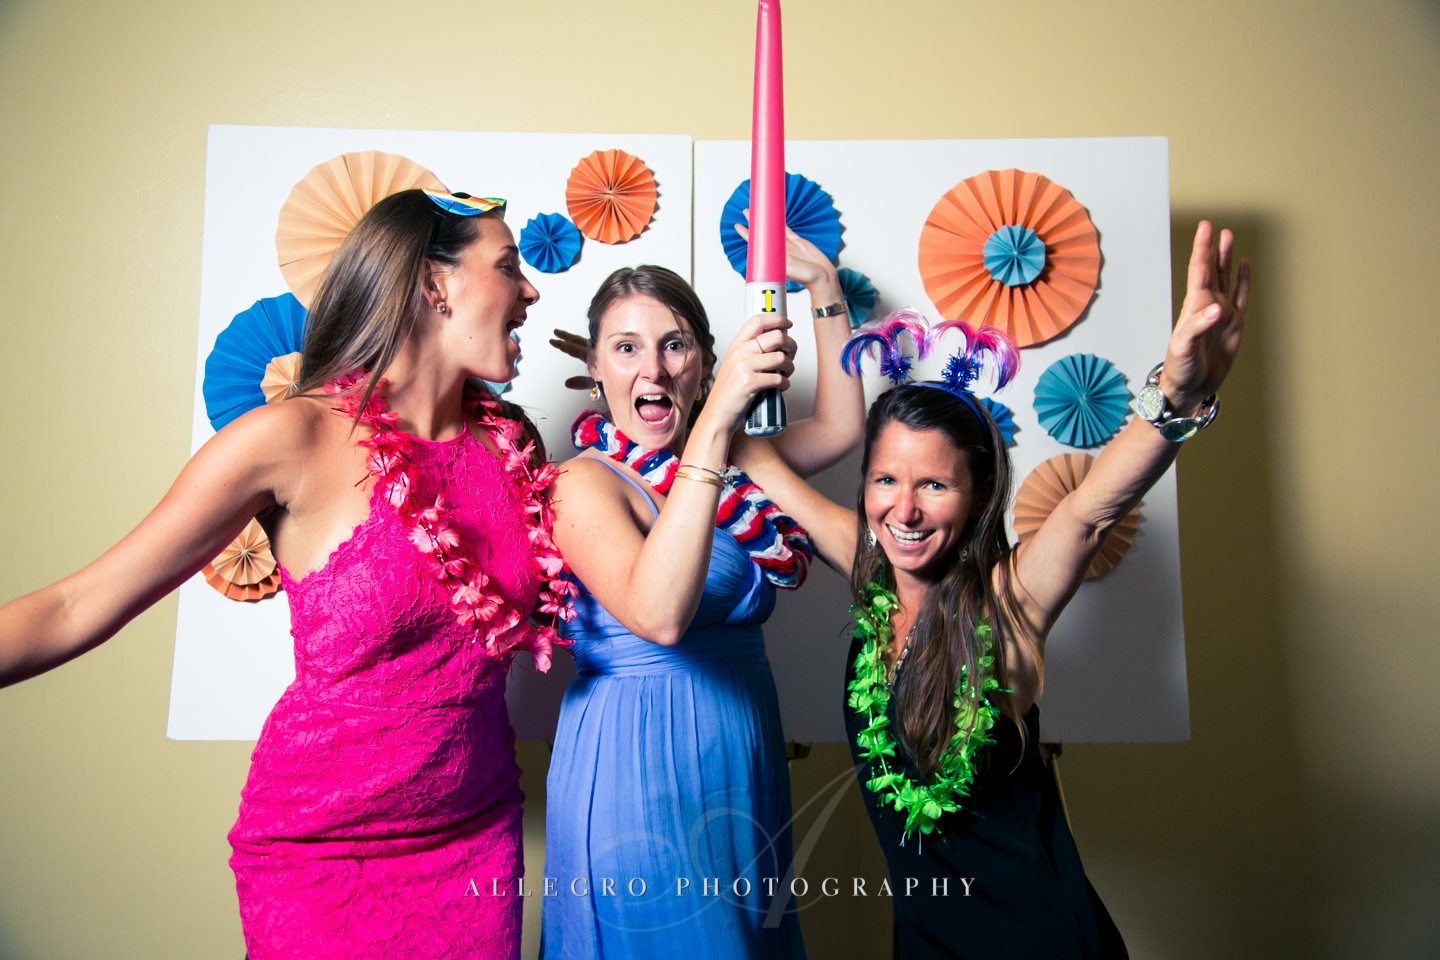 photo booth photo by Allegro Photography